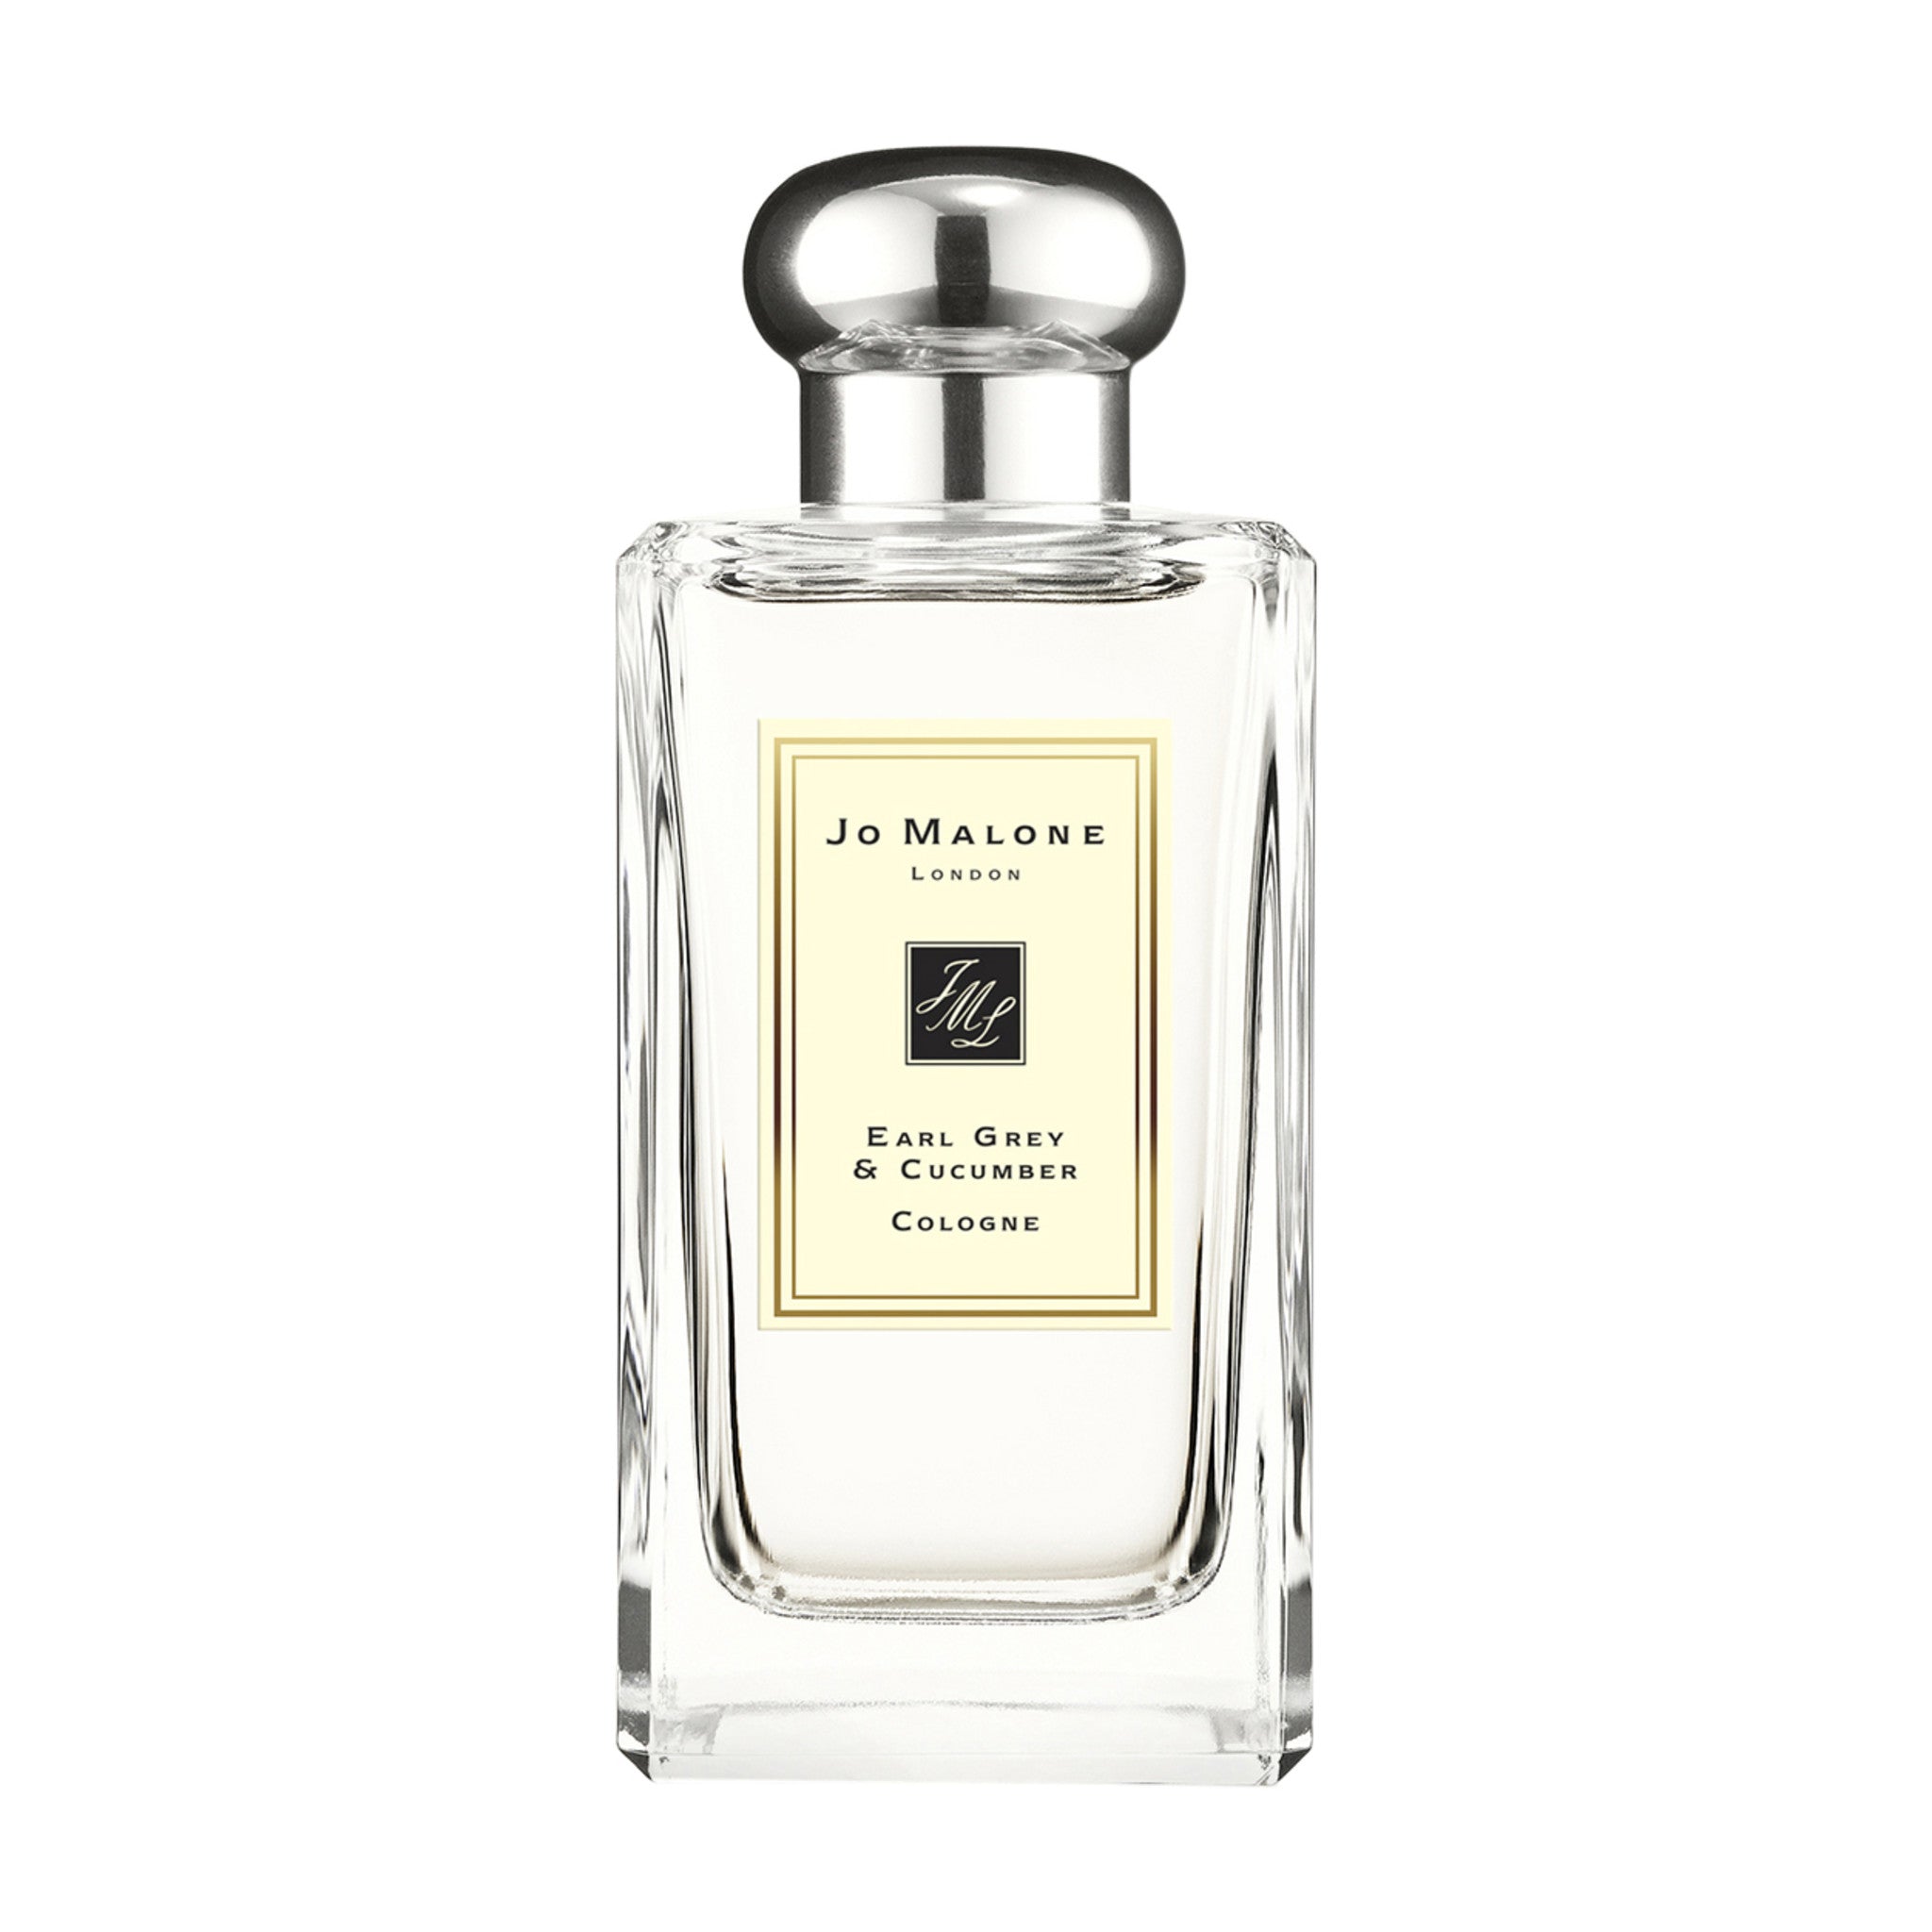 Jo Malone London Earl Grey and Cucumber Cologne Size variant: 3.4 fl oz | 100 ml main image.